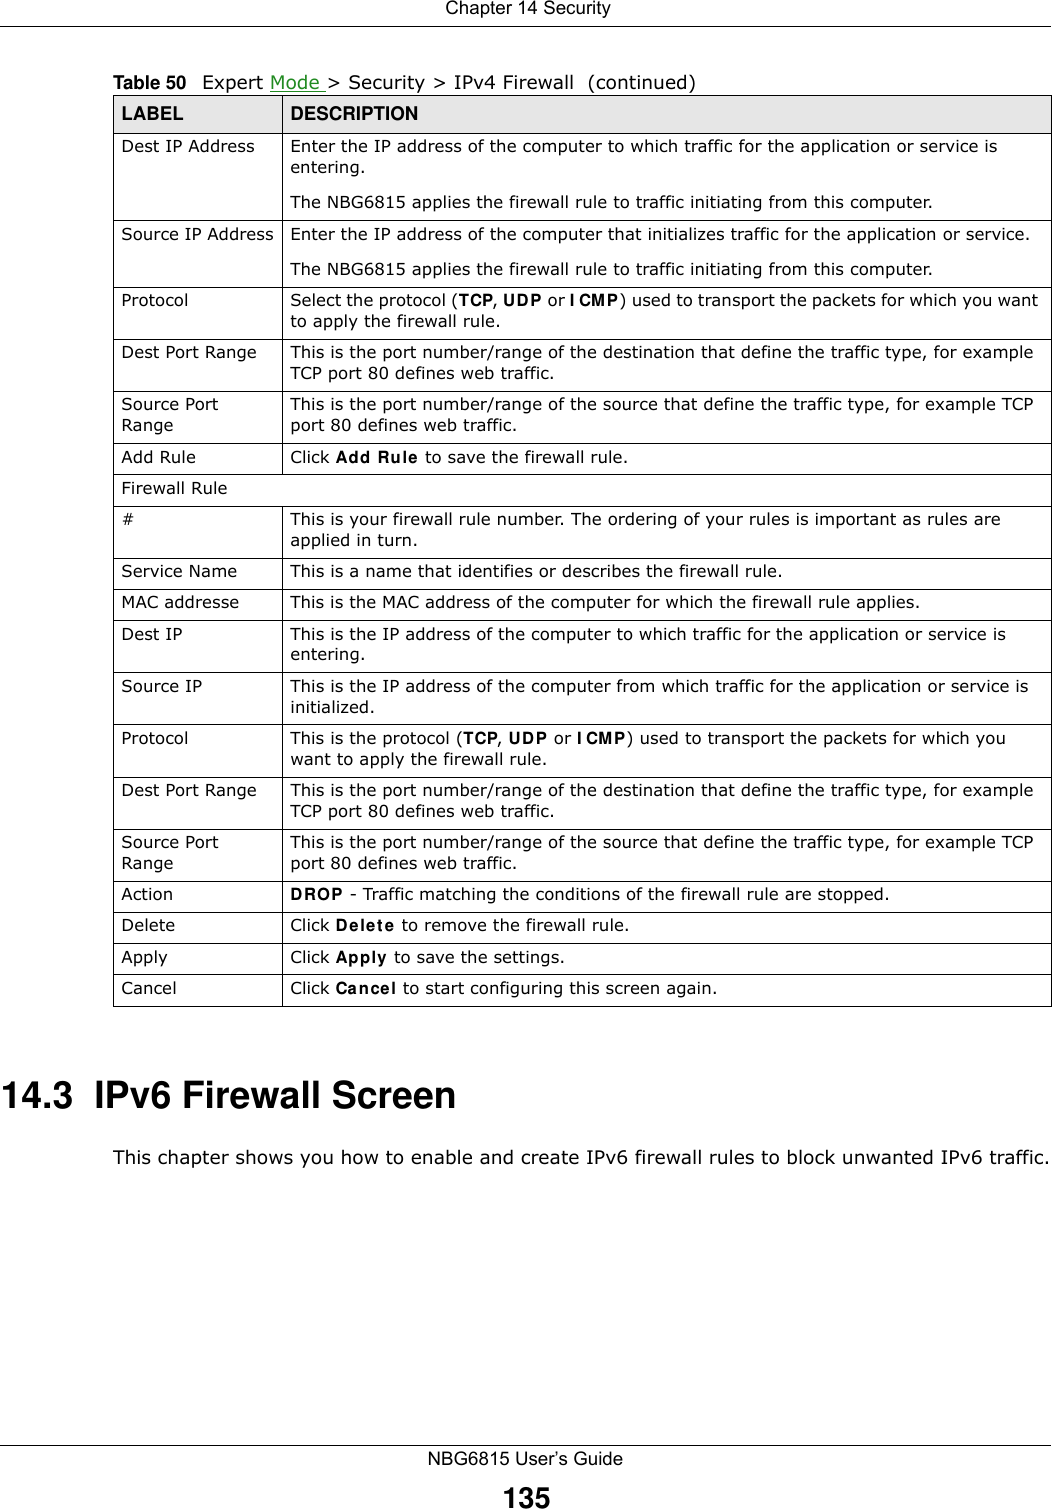  Chapter 14 SecurityNBG6815 User’s Guide13514.3  IPv6 Firewall Screen This chapter shows you how to enable and create IPv6 firewall rules to block unwanted IPv6 traffic.Dest IP Address Enter the IP address of the computer to which traffic for the application or service is entering. The NBG6815 applies the firewall rule to traffic initiating from this computer. Source IP Address Enter the IP address of the computer that initializes traffic for the application or service.The NBG6815 applies the firewall rule to traffic initiating from this computer.Protocol  Select the protocol (TCP, UDP or ICMP) used to transport the packets for which you want to apply the firewall rule.Dest Port Range This is the port number/range of the destination that define the traffic type, for example TCP port 80 defines web traffic.Source Port RangeThis is the port number/range of the source that define the traffic type, for example TCP port 80 defines web traffic.Add Rule Click Add Rule to save the firewall rule. Firewall Rule# This is your firewall rule number. The ordering of your rules is important as rules are applied in turn. Service Name This is a name that identifies or describes the firewall rule.MAC addresse This is the MAC address of the computer for which the firewall rule applies.Dest IP This is the IP address of the computer to which traffic for the application or service is entering. Source IP This is the IP address of the computer from which traffic for the application or service is initialized. Protocol This is the protocol (TCP, UDP or ICMP) used to transport the packets for which you want to apply the firewall rule. Dest Port Range This is the port number/range of the destination that define the traffic type, for example TCP port 80 defines web traffic.Source Port RangeThis is the port number/range of the source that define the traffic type, for example TCP port 80 defines web traffic.Action DROP - Traffic matching the conditions of the firewall rule are stopped.Delete Click Delete to remove the firewall rule.Apply Click Apply to save the settings. Cancel Click Cancel to start configuring this screen again. Table 50   Expert Mode &gt; Security &gt; IPv4 Firewall  (continued)LABEL DESCRIPTION